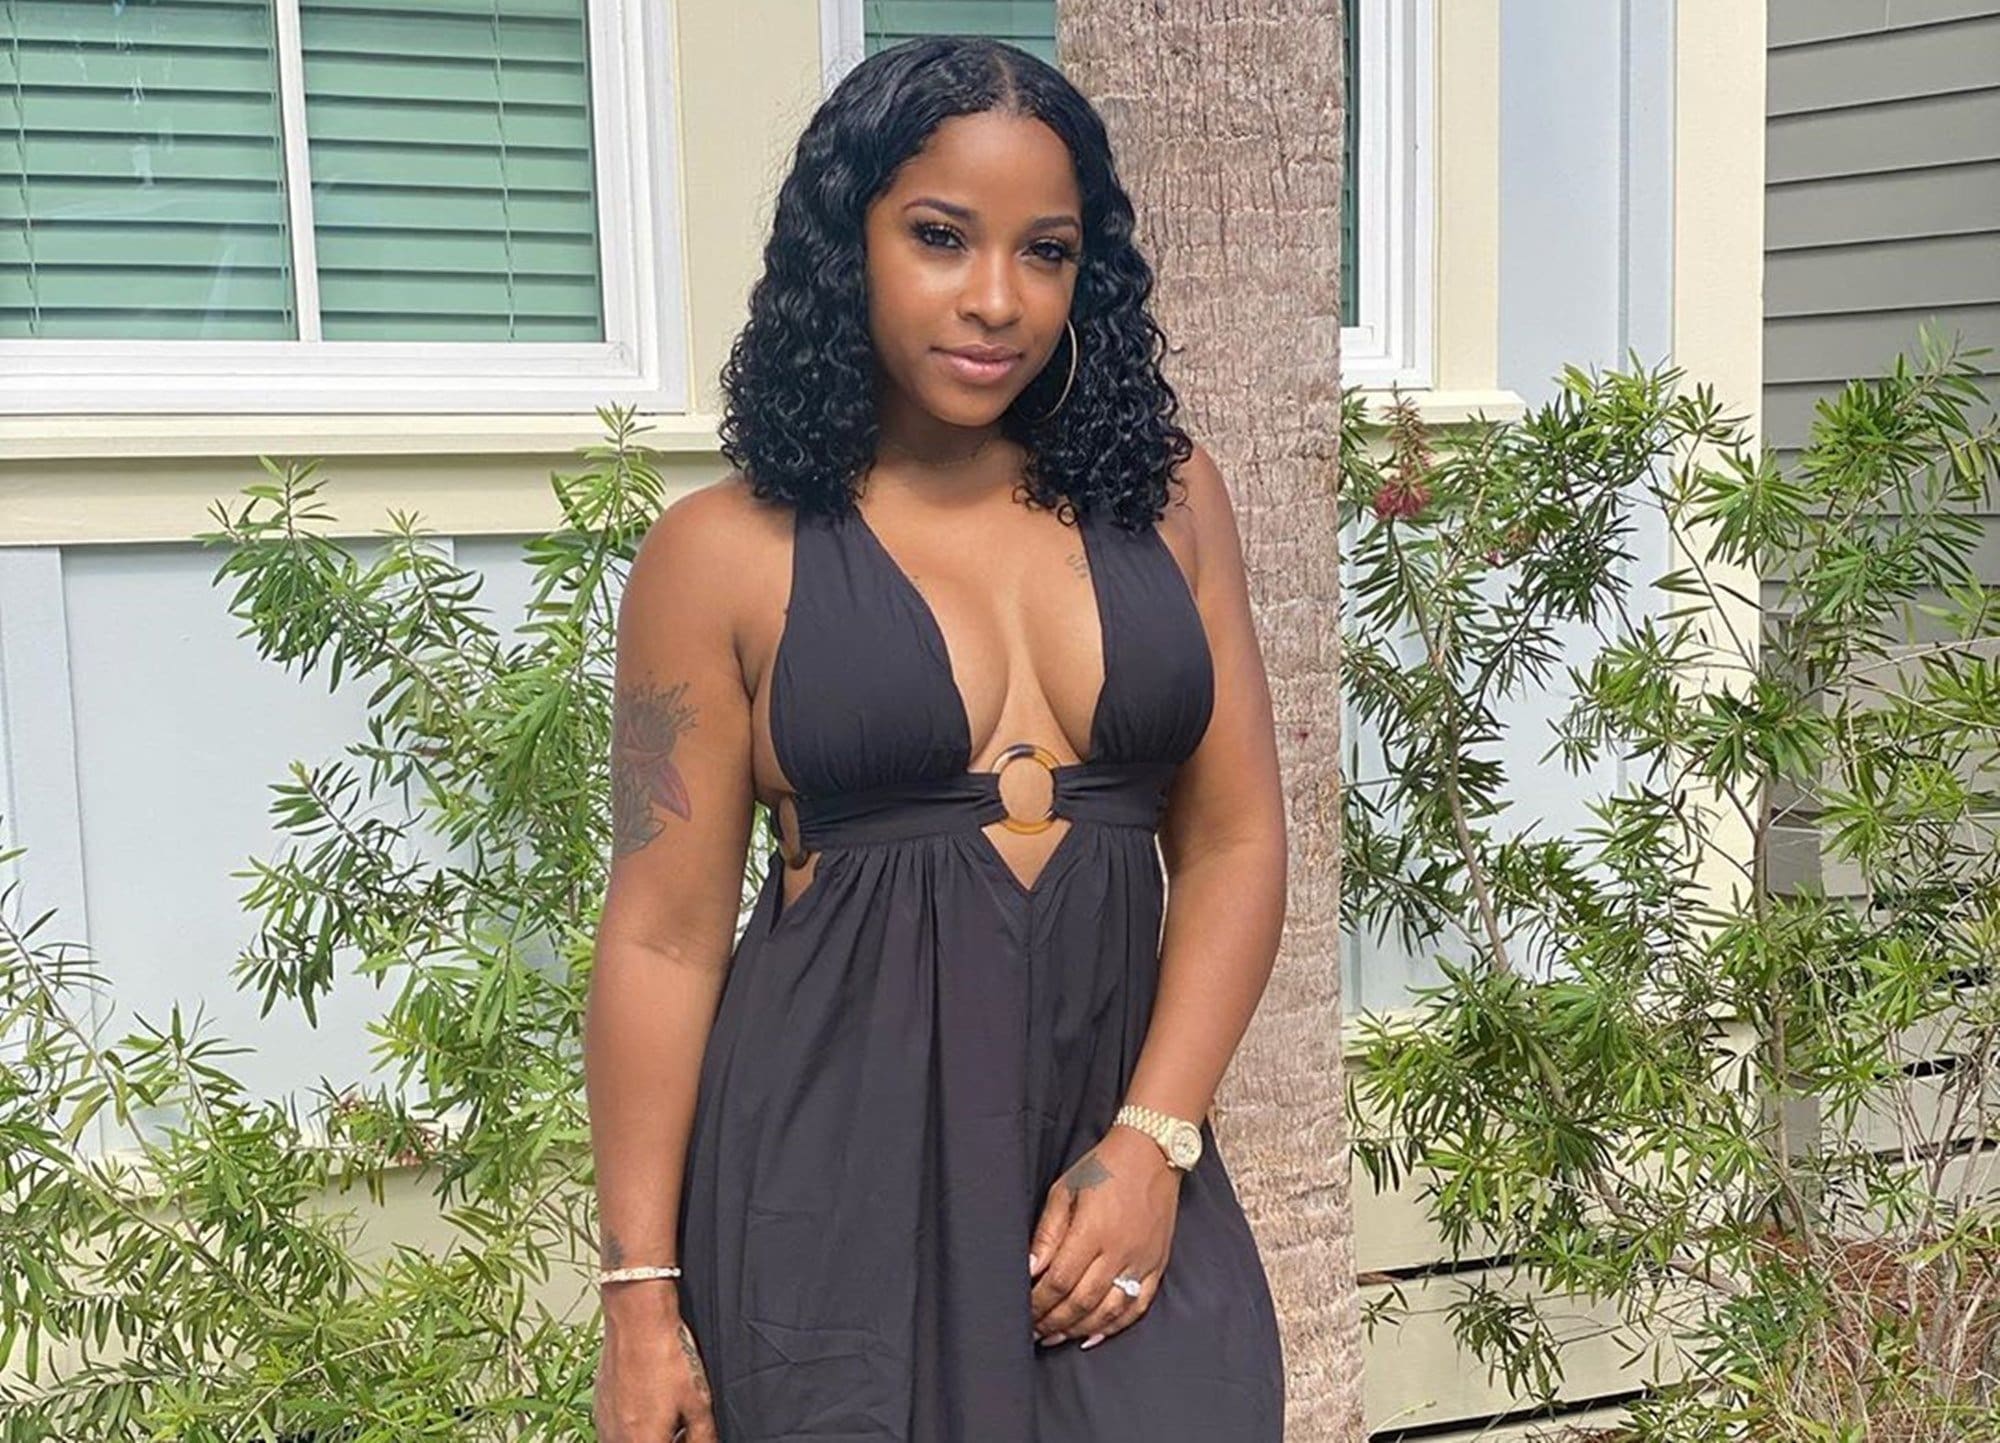 Toya Johnson Is Chilling With Reign Rushing And Jashae This Weekend - See Their Pics Together